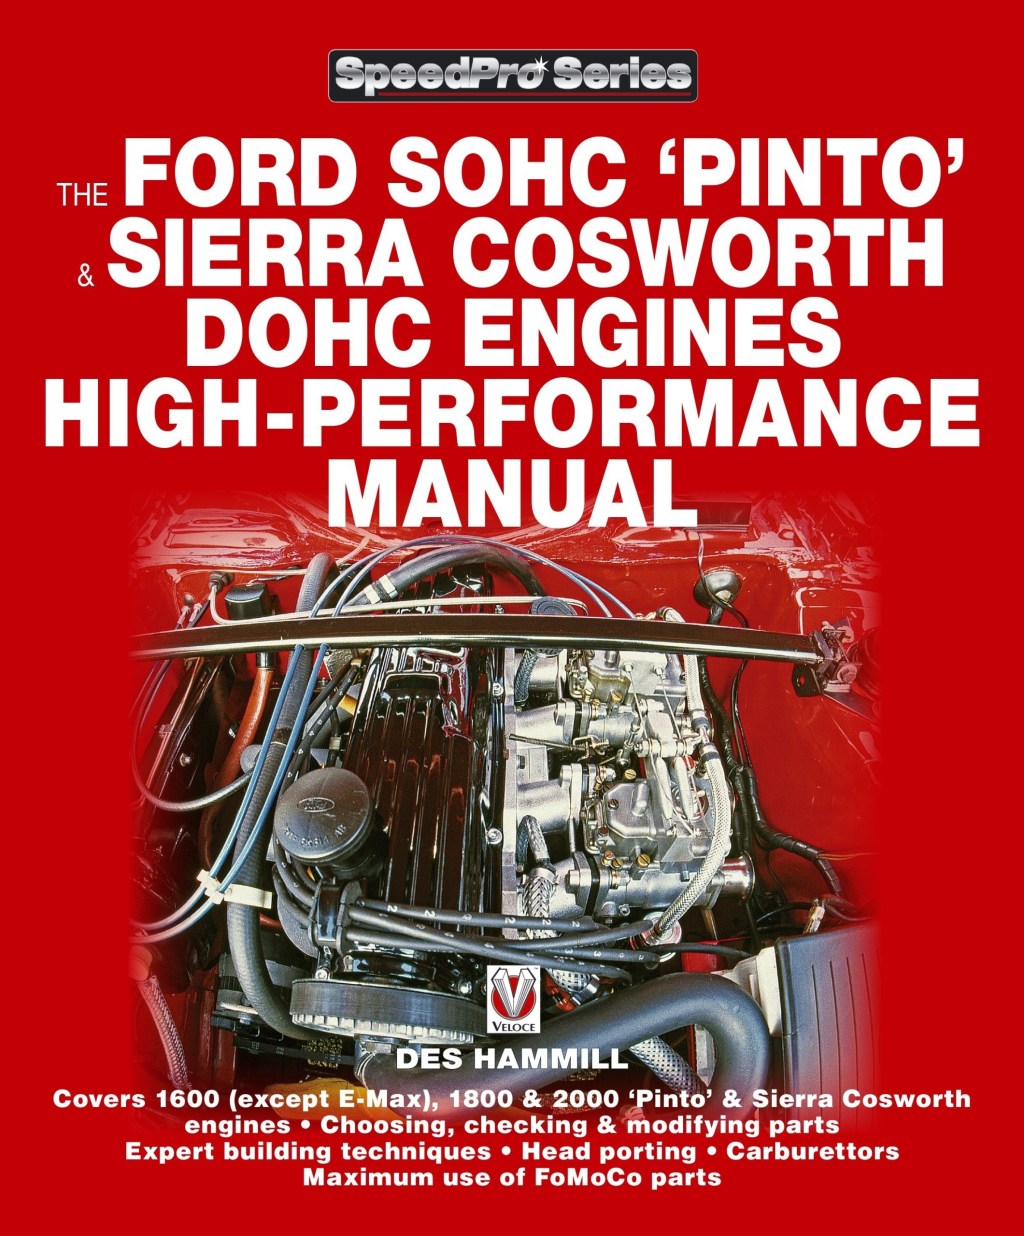 Picture of: The Ford SOHC ‘Pinto’ & Sierra Cosworth DOHC Engines Manual